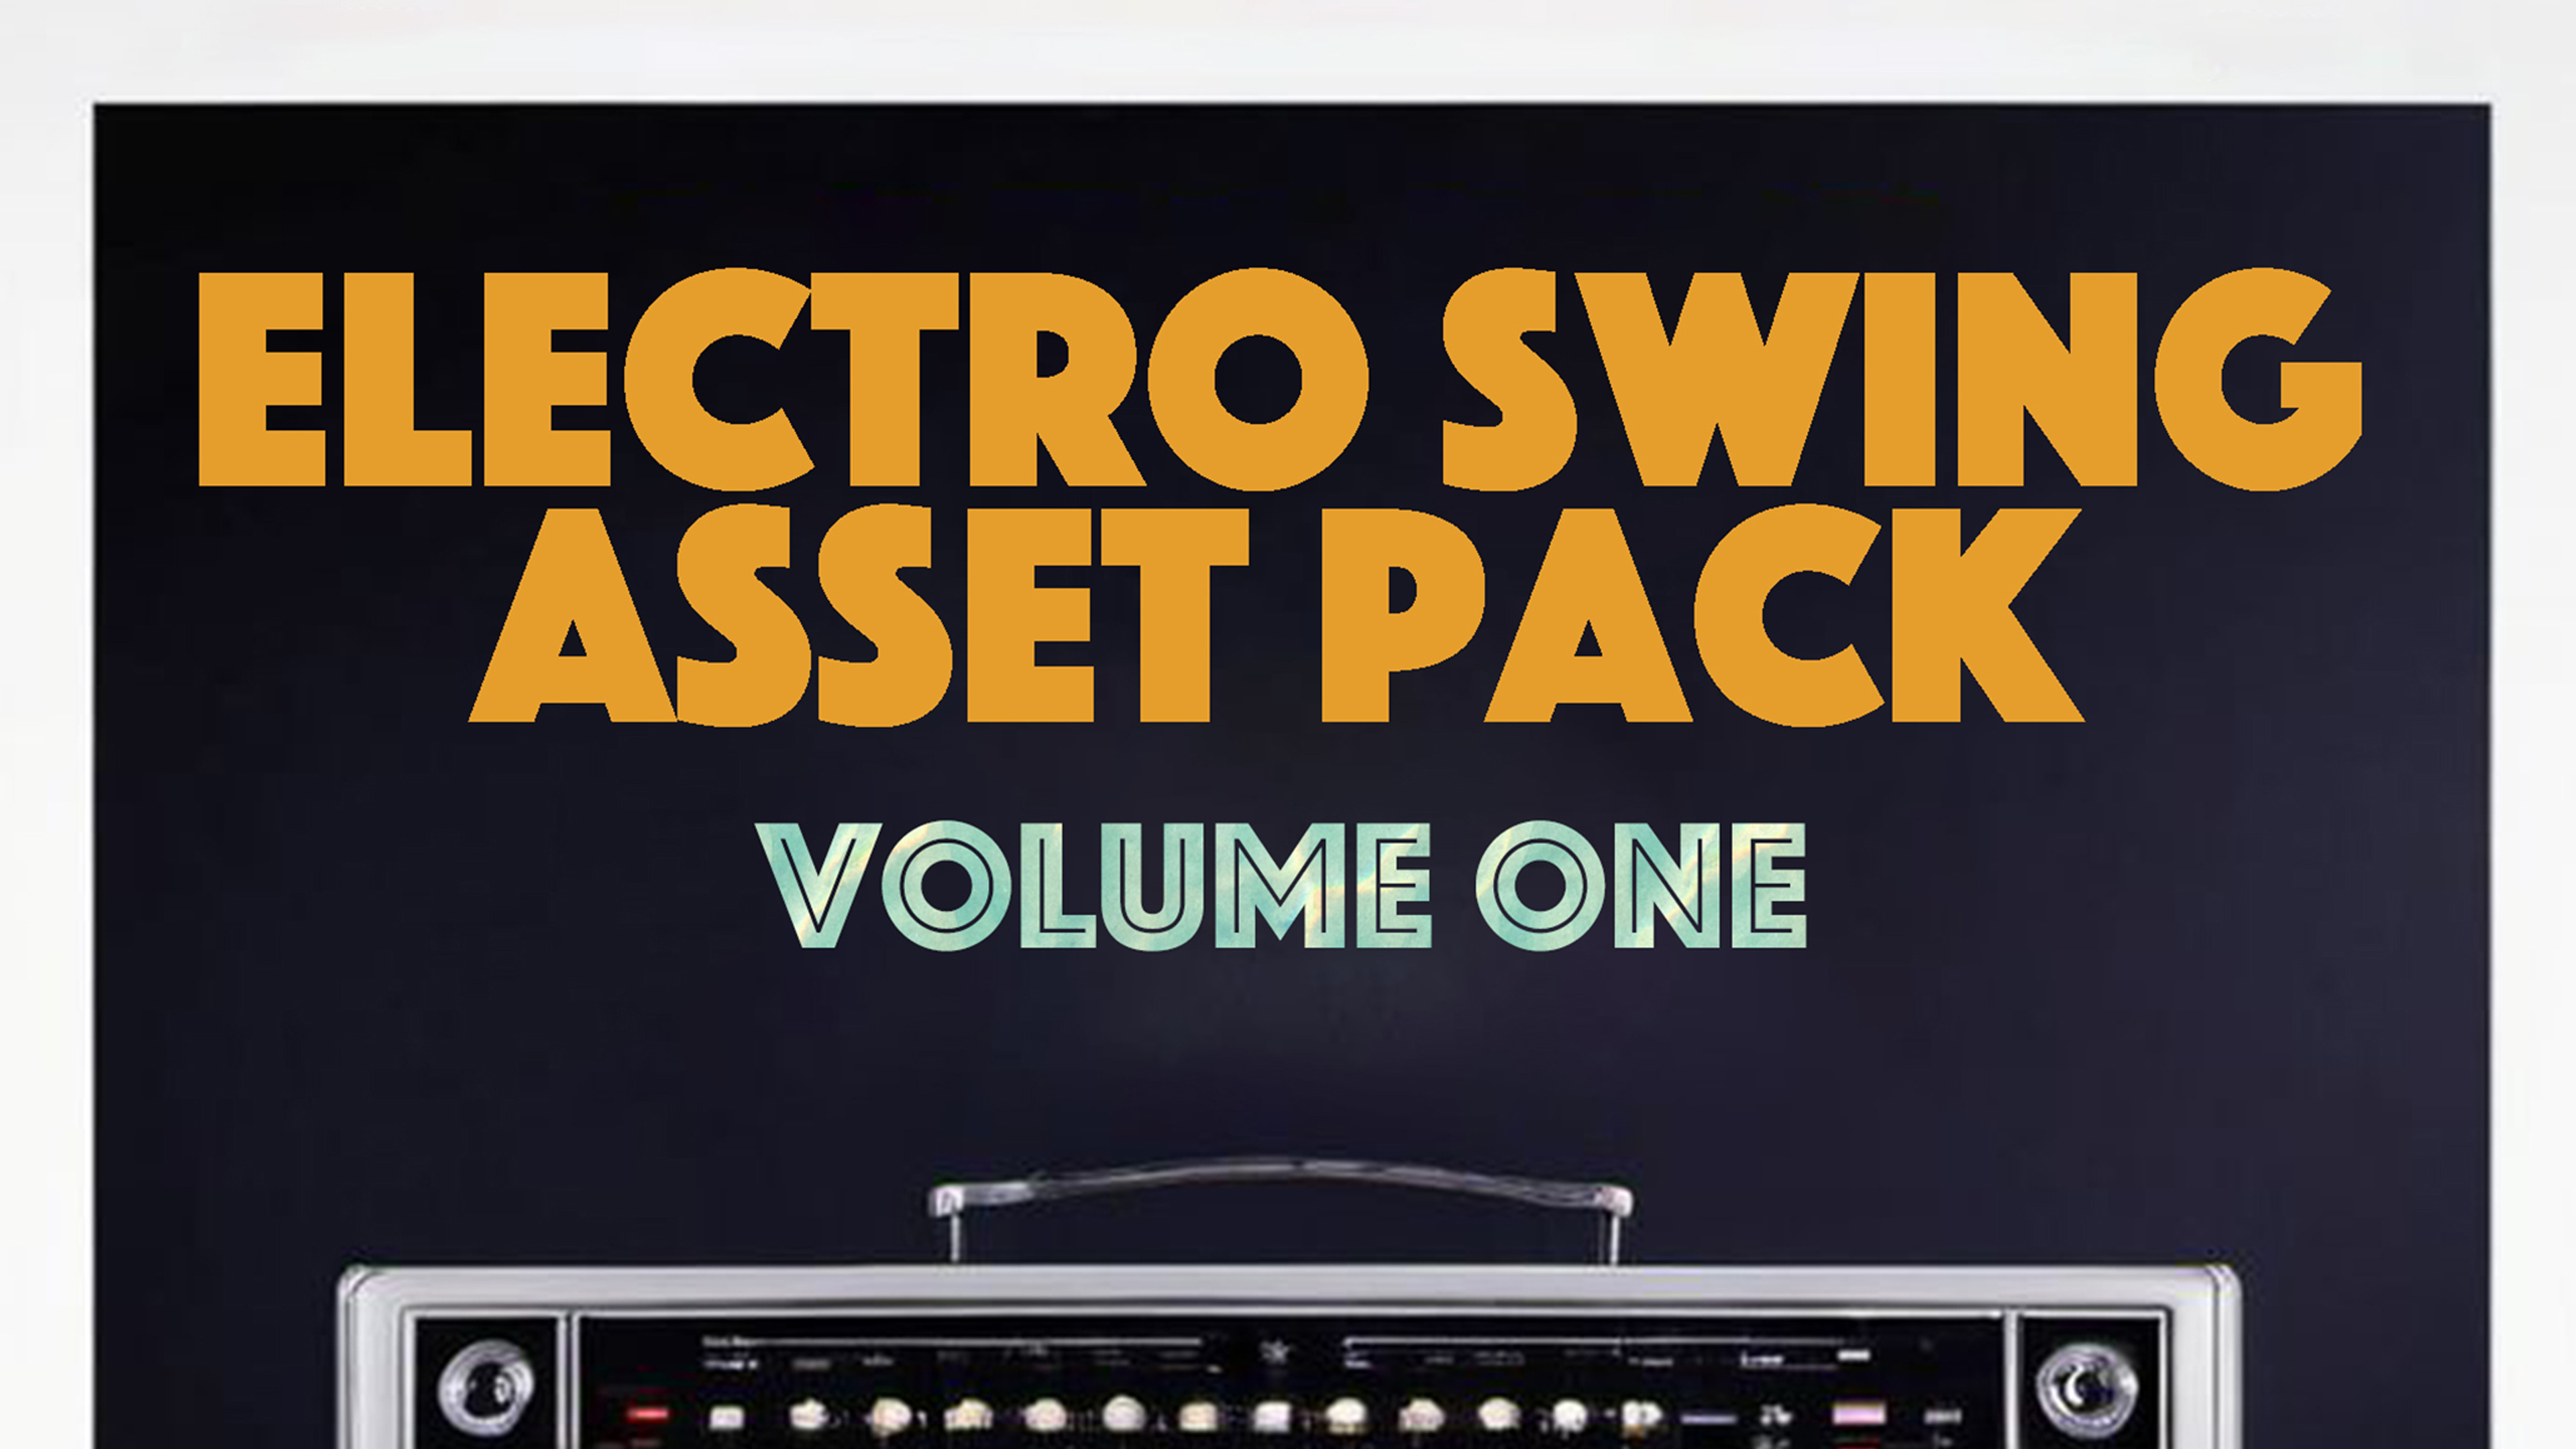 Electro Swing Asset Pack Vol. 1